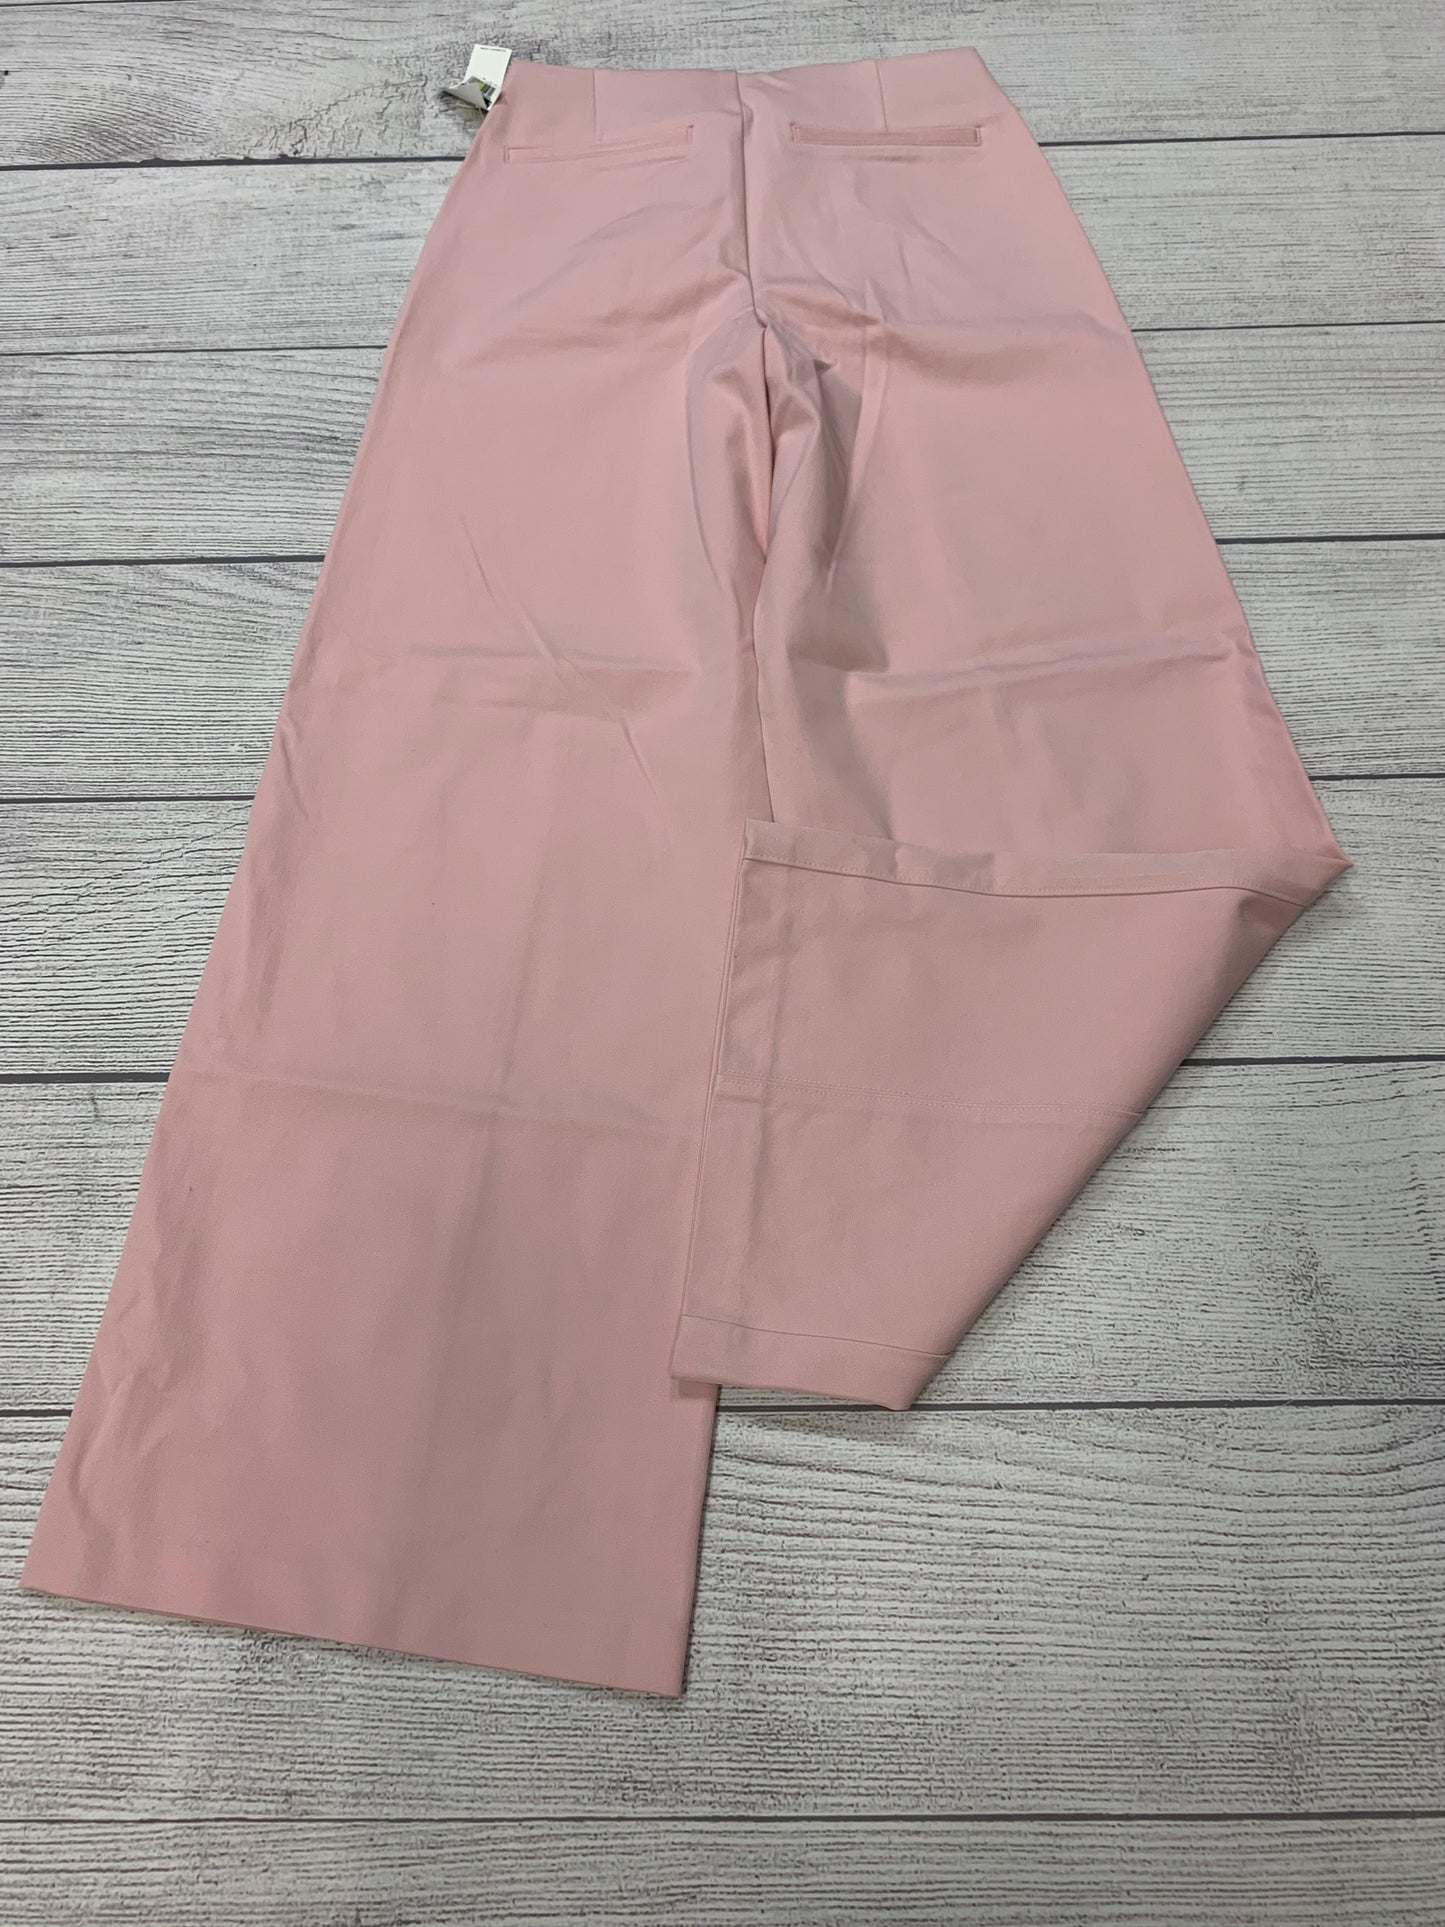 Pink Pants Work/dress Old Navy, Size S